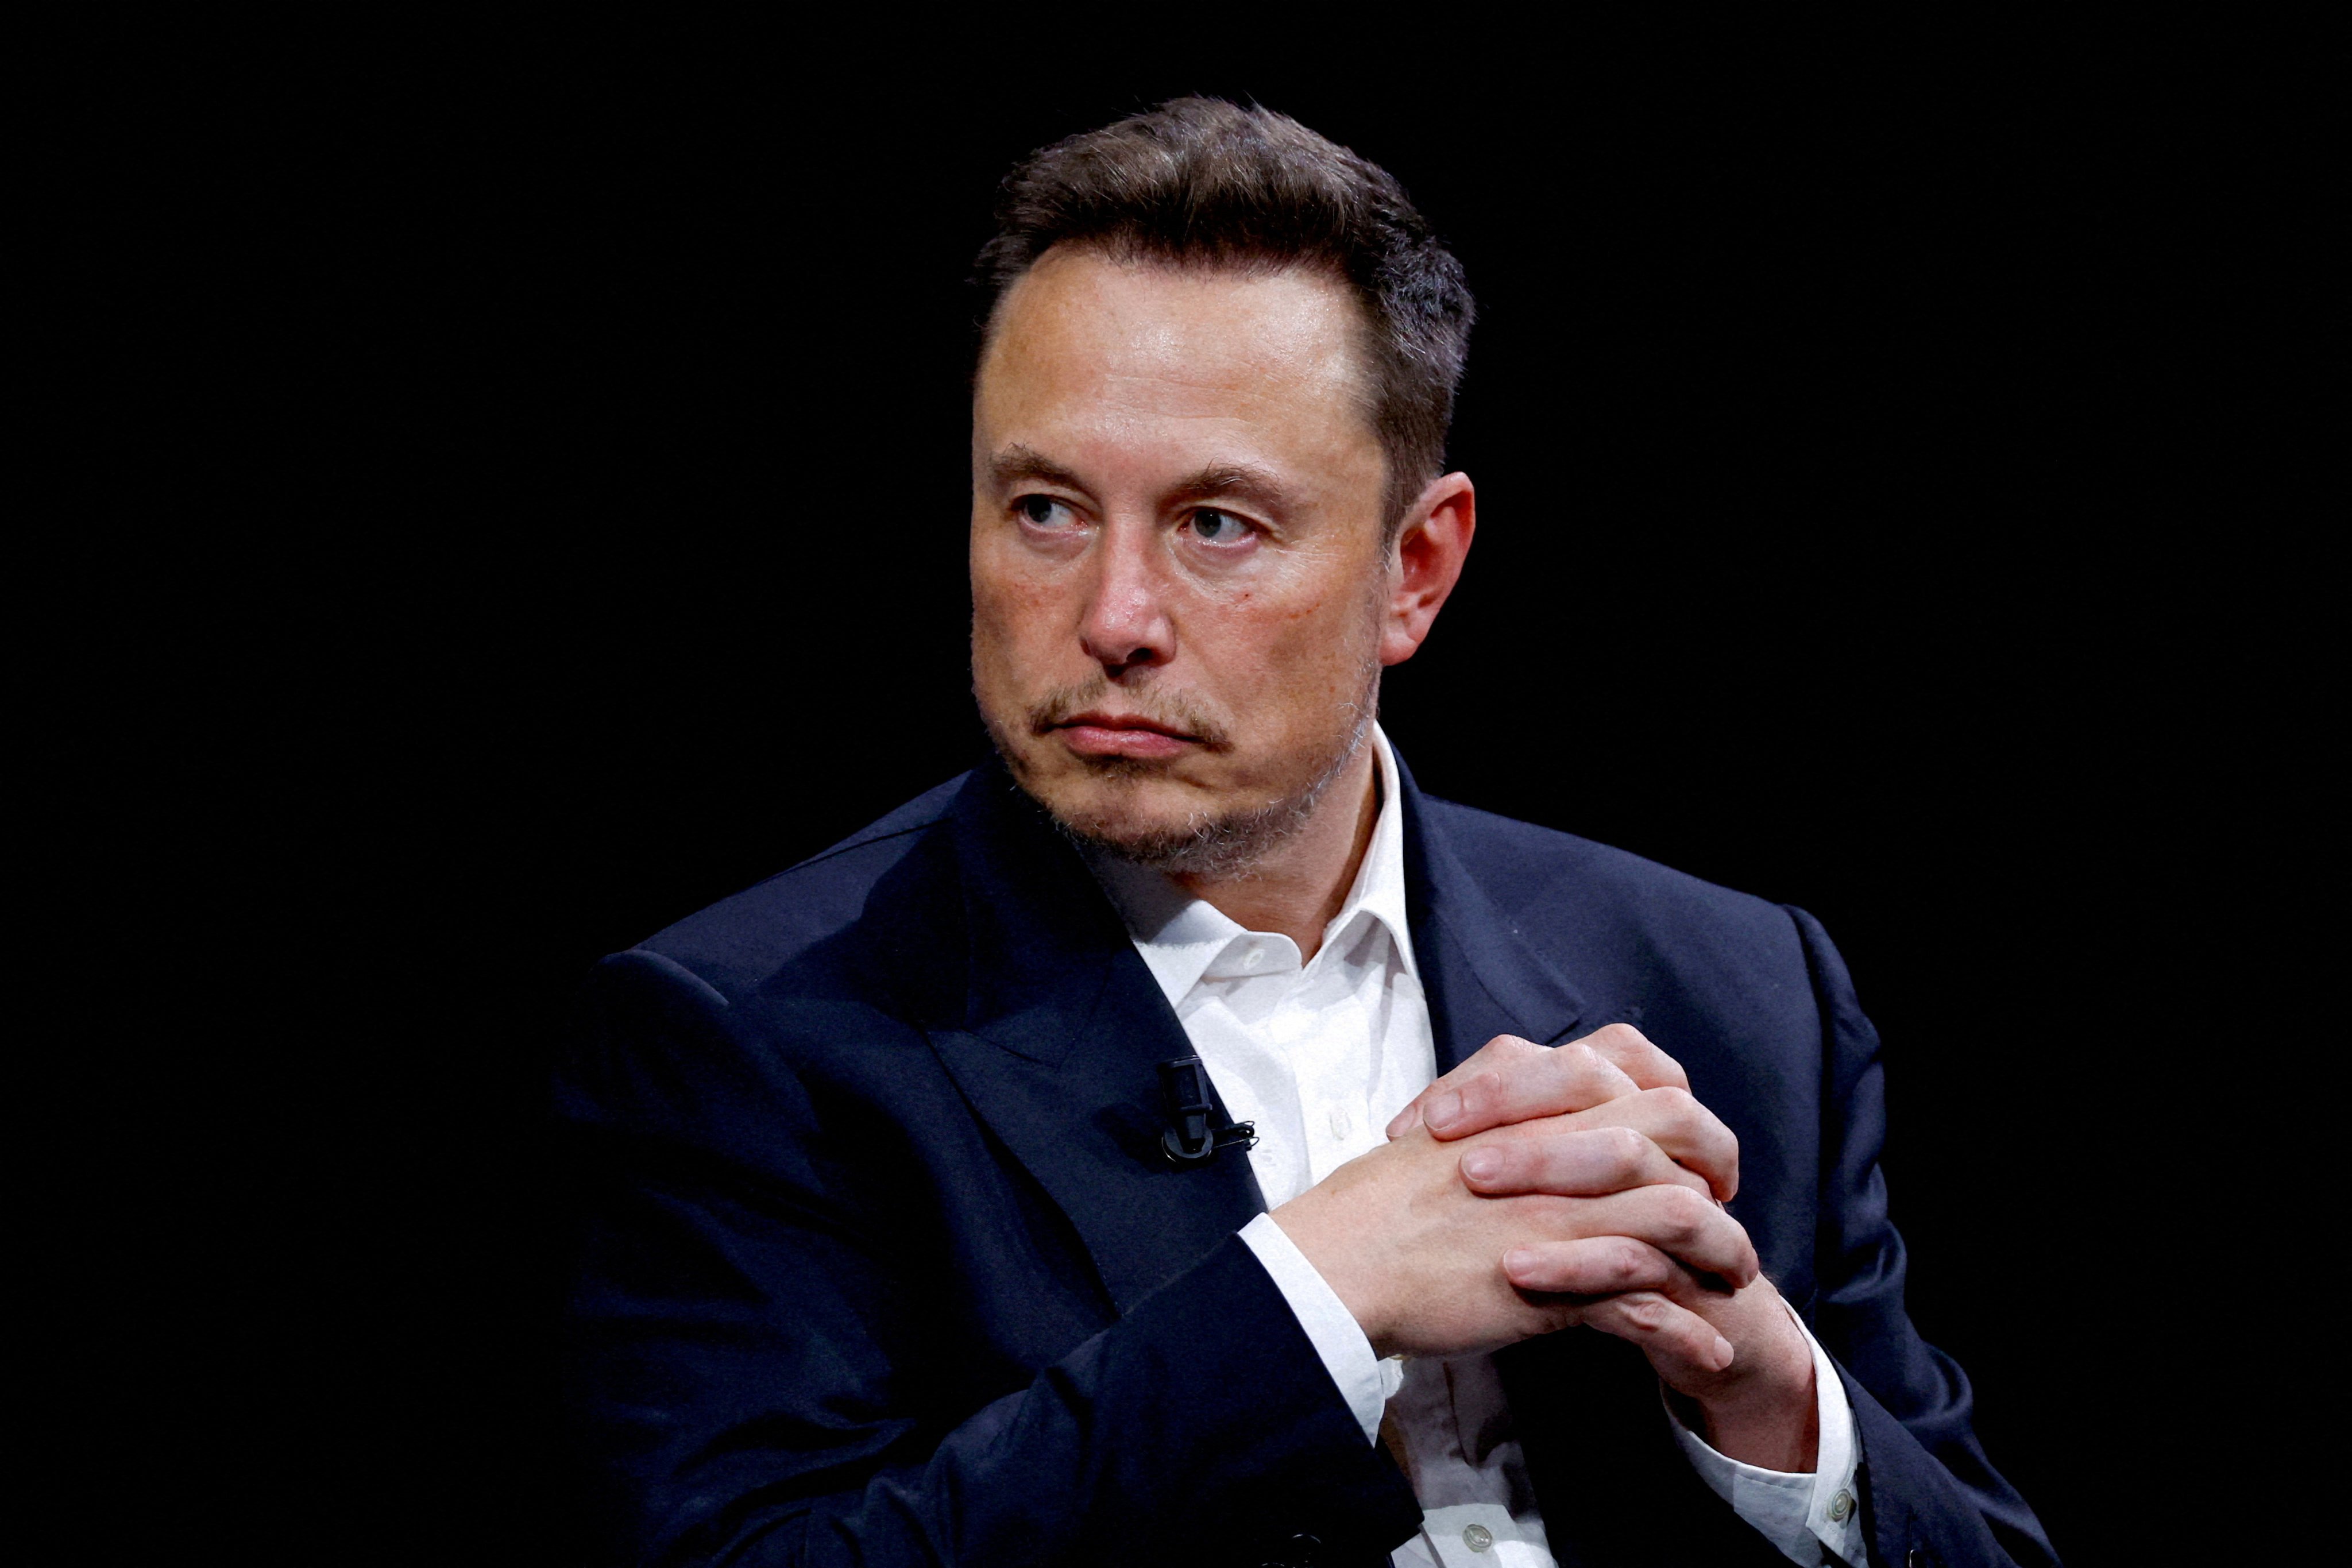 Elon Musk’s wealth is down US$30 billion this year to just under US$200 billion, according to Bloomberg. Photo: Reuters